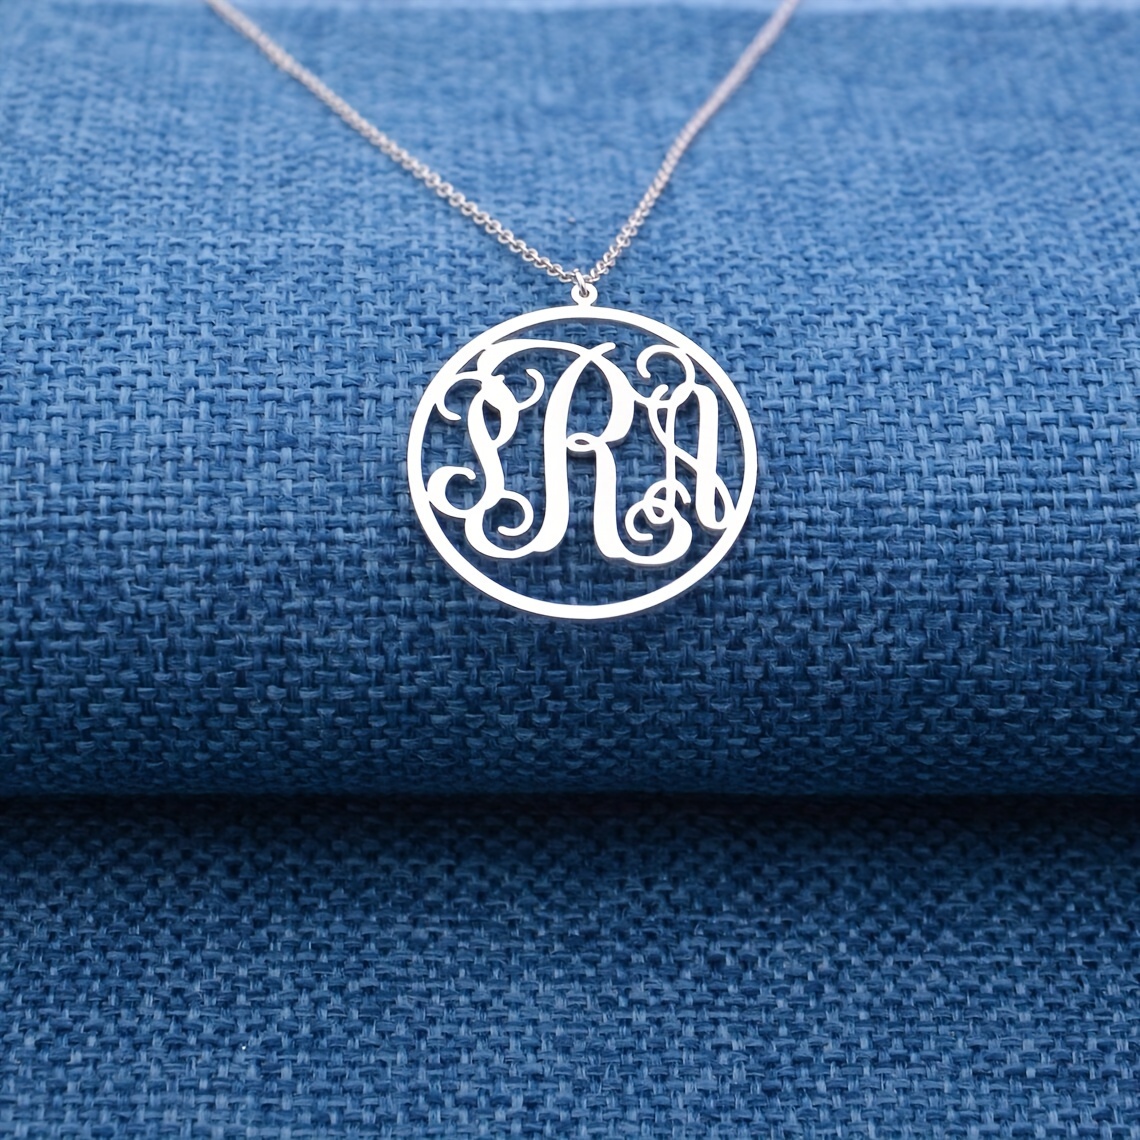 

Customized 1pc 3 Interwoven Initials Personalized Circular Ladies Pendant Necklace, Stainless Steel Supporting 3 English Letters Elegant Versatile Daily Wear Jewelry (english Only)